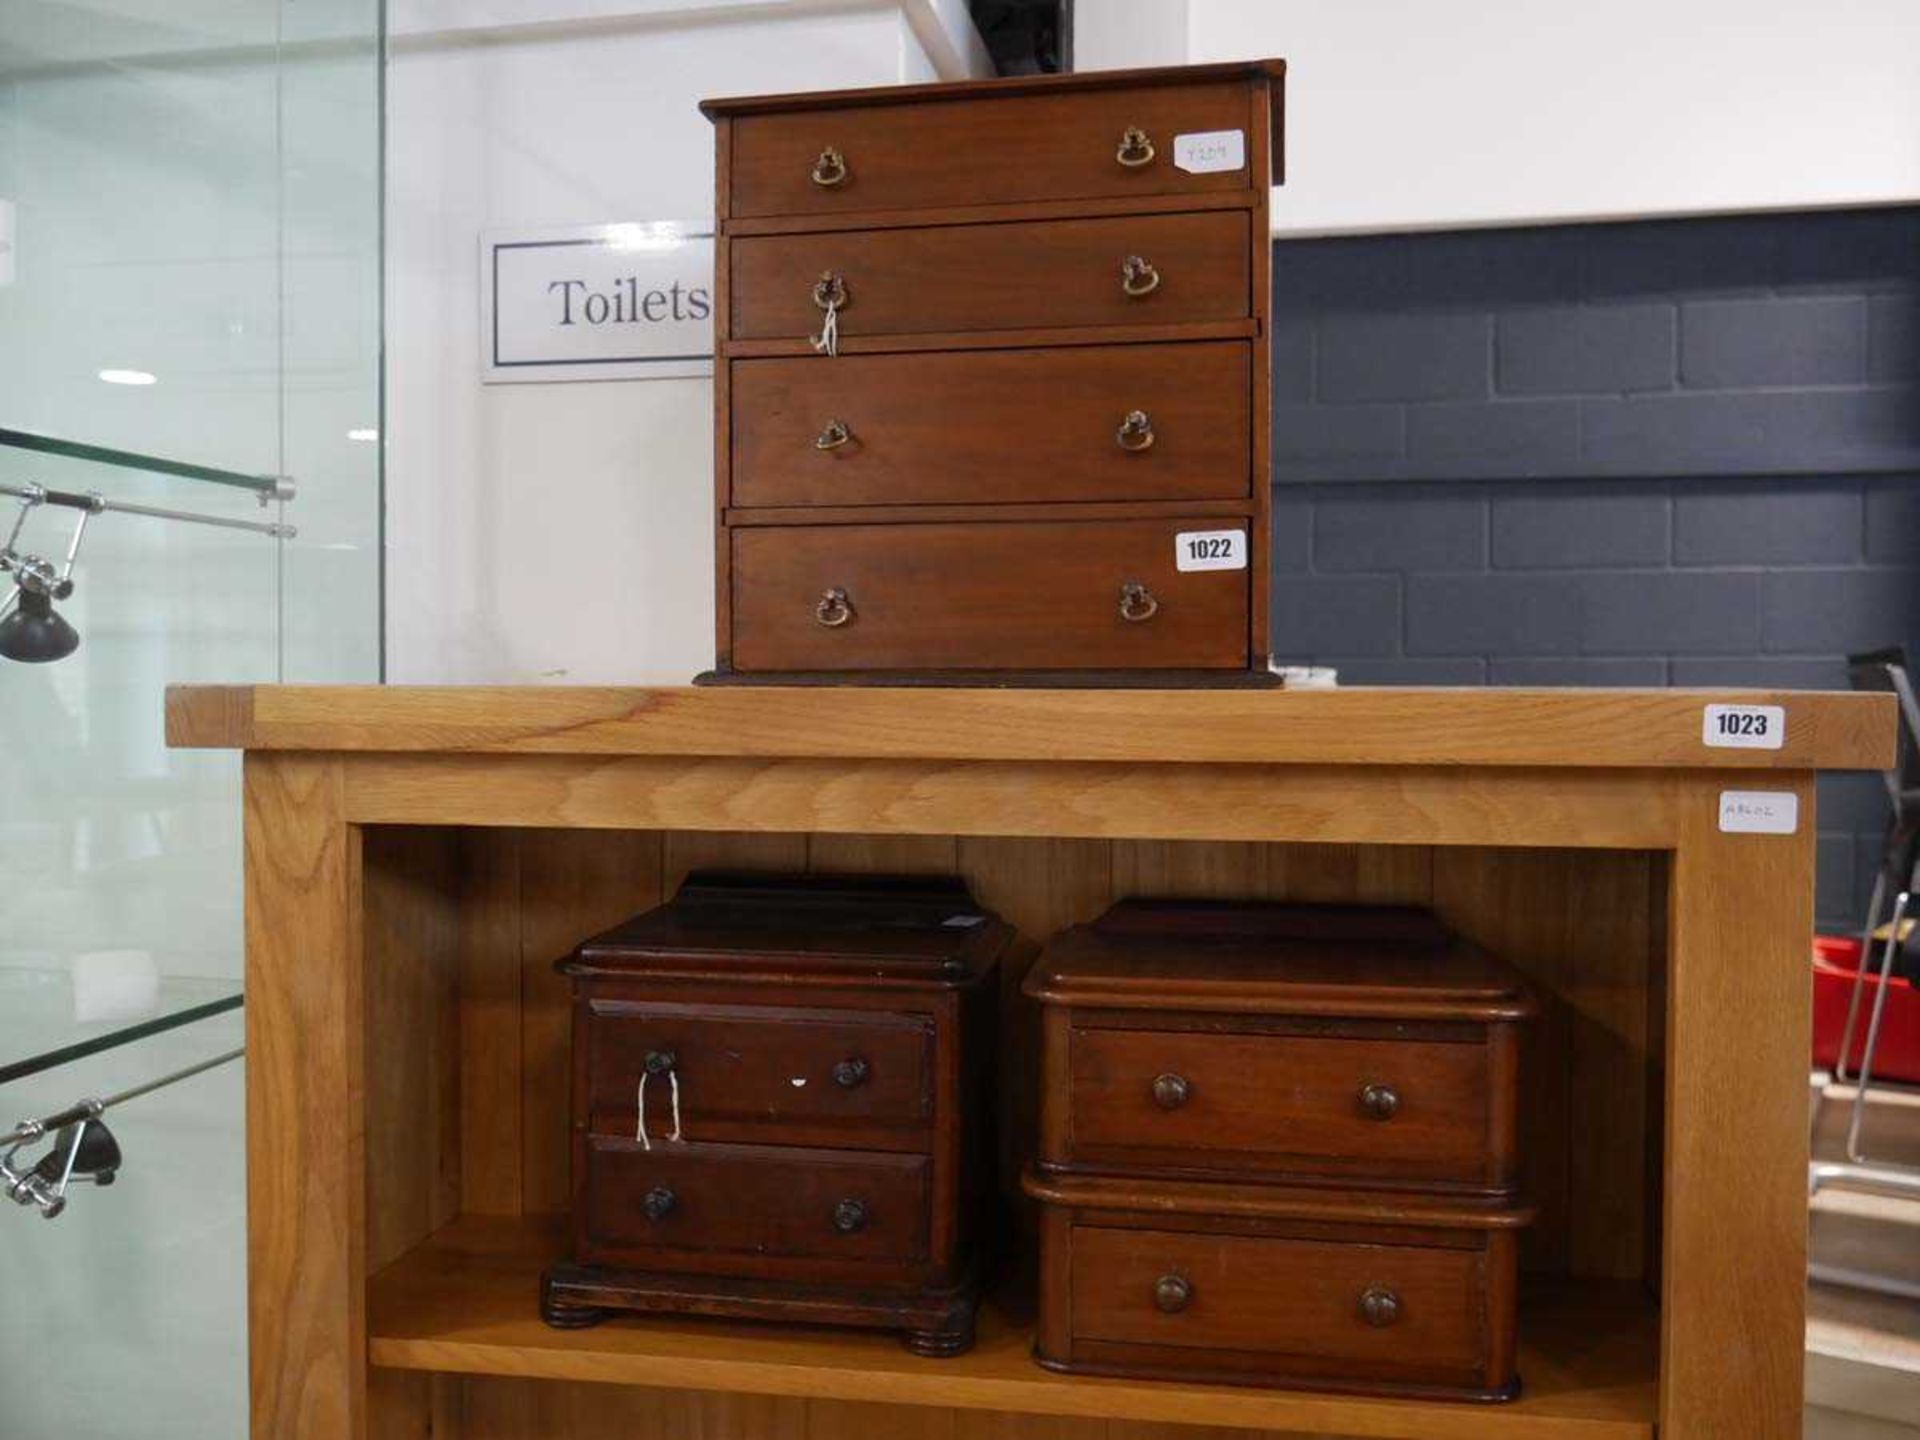 2 small wooden drawer units together with a wooden desk top chest